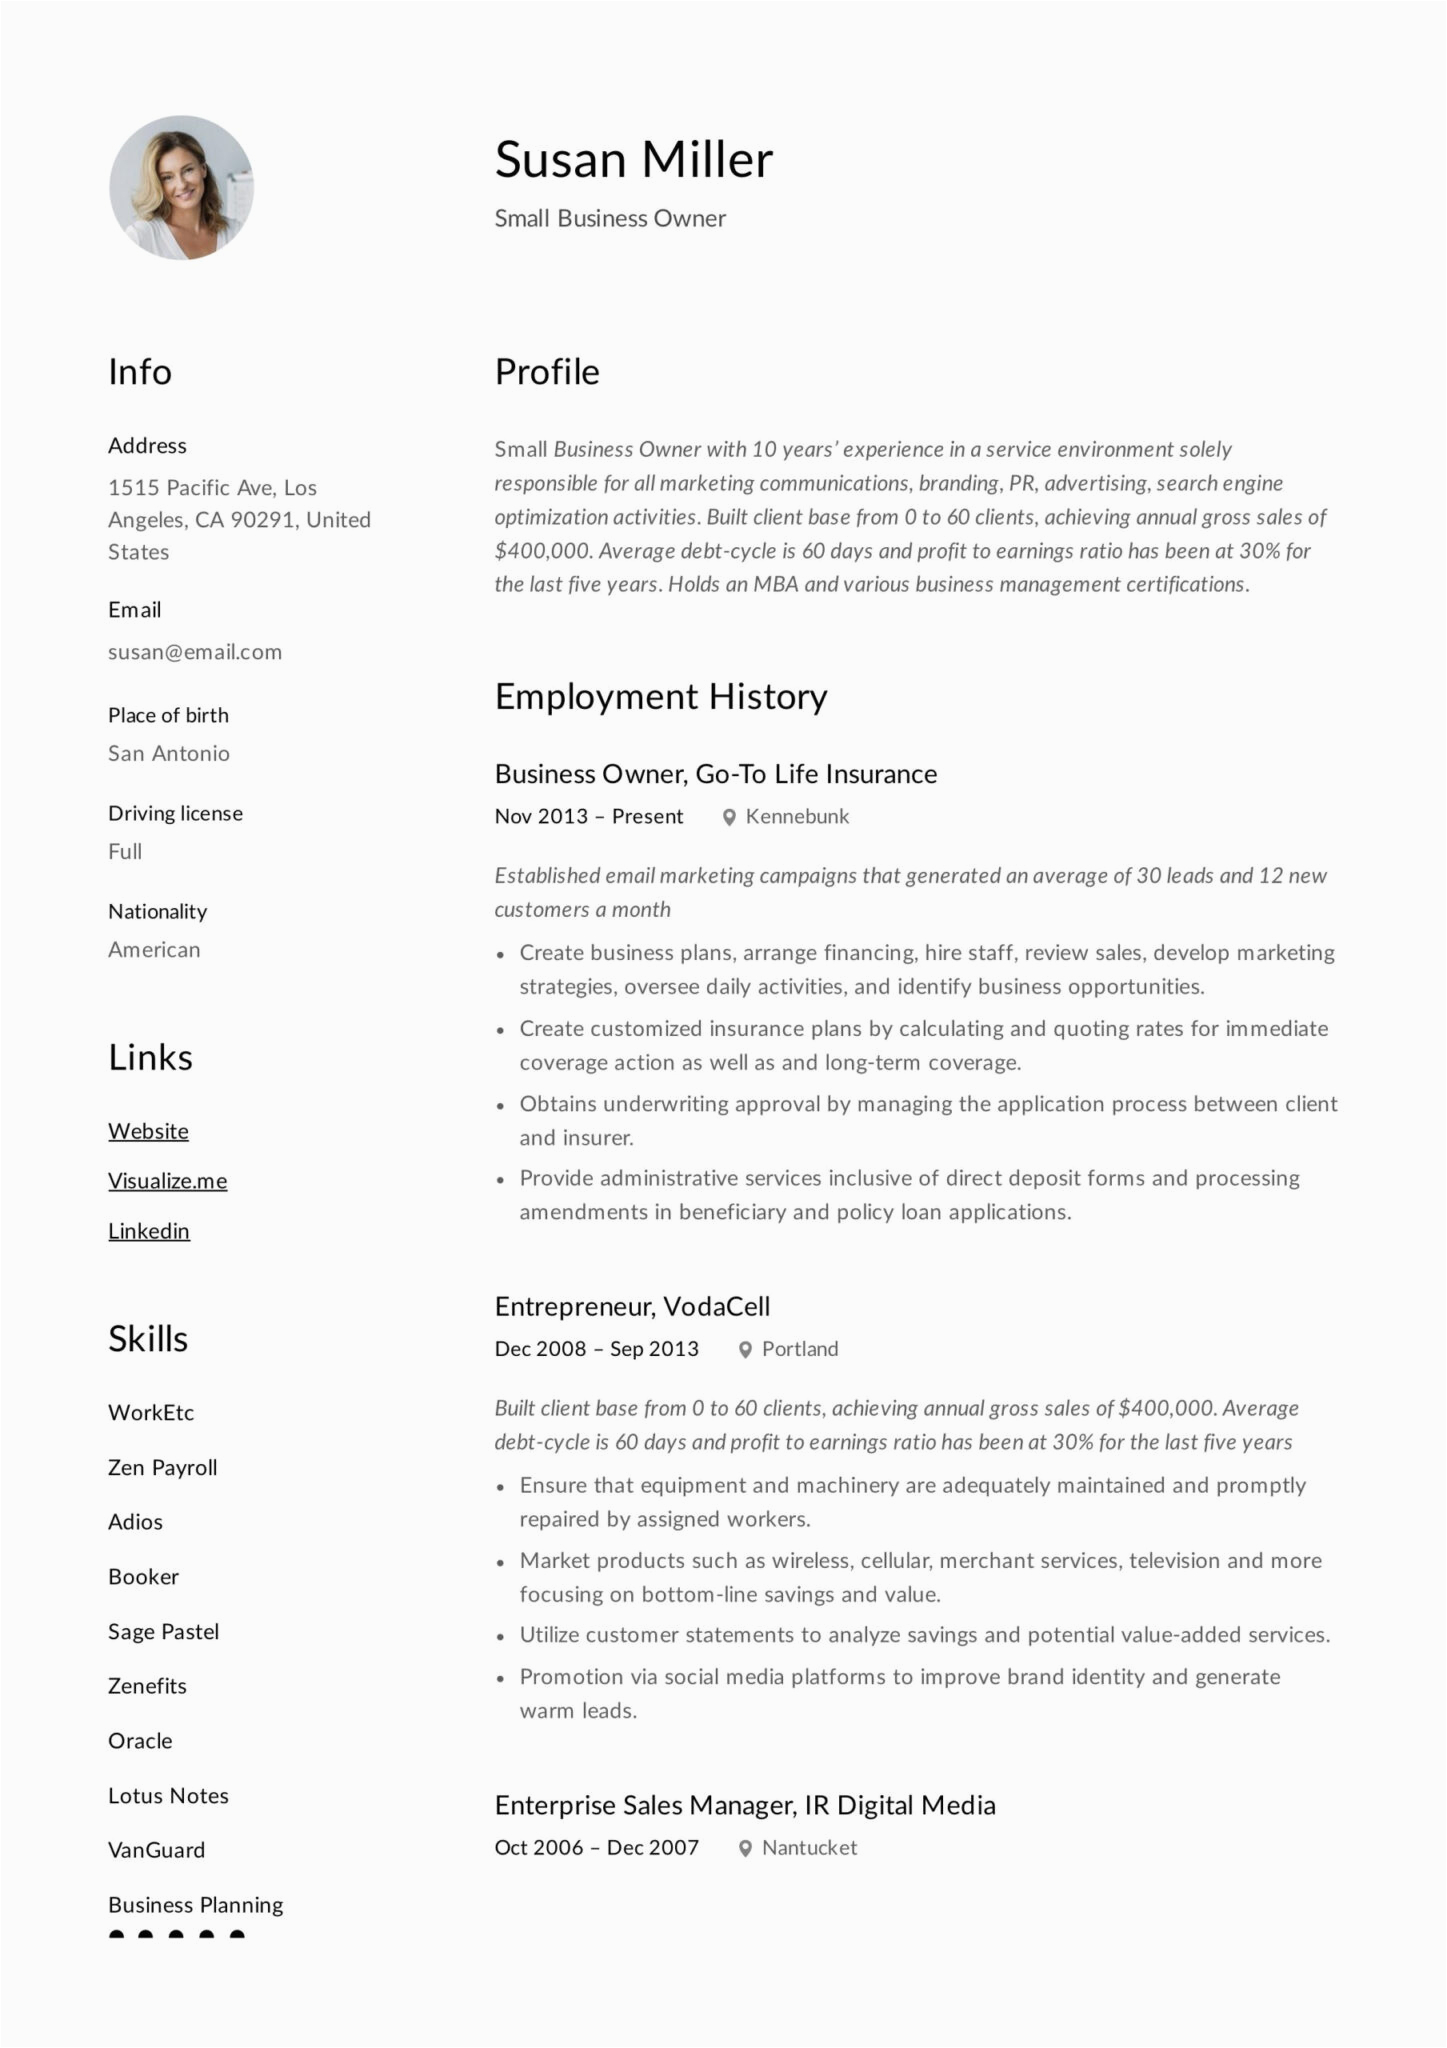 Resume Template for Little Work Experience Sample Resume for someone with Little Work Experience